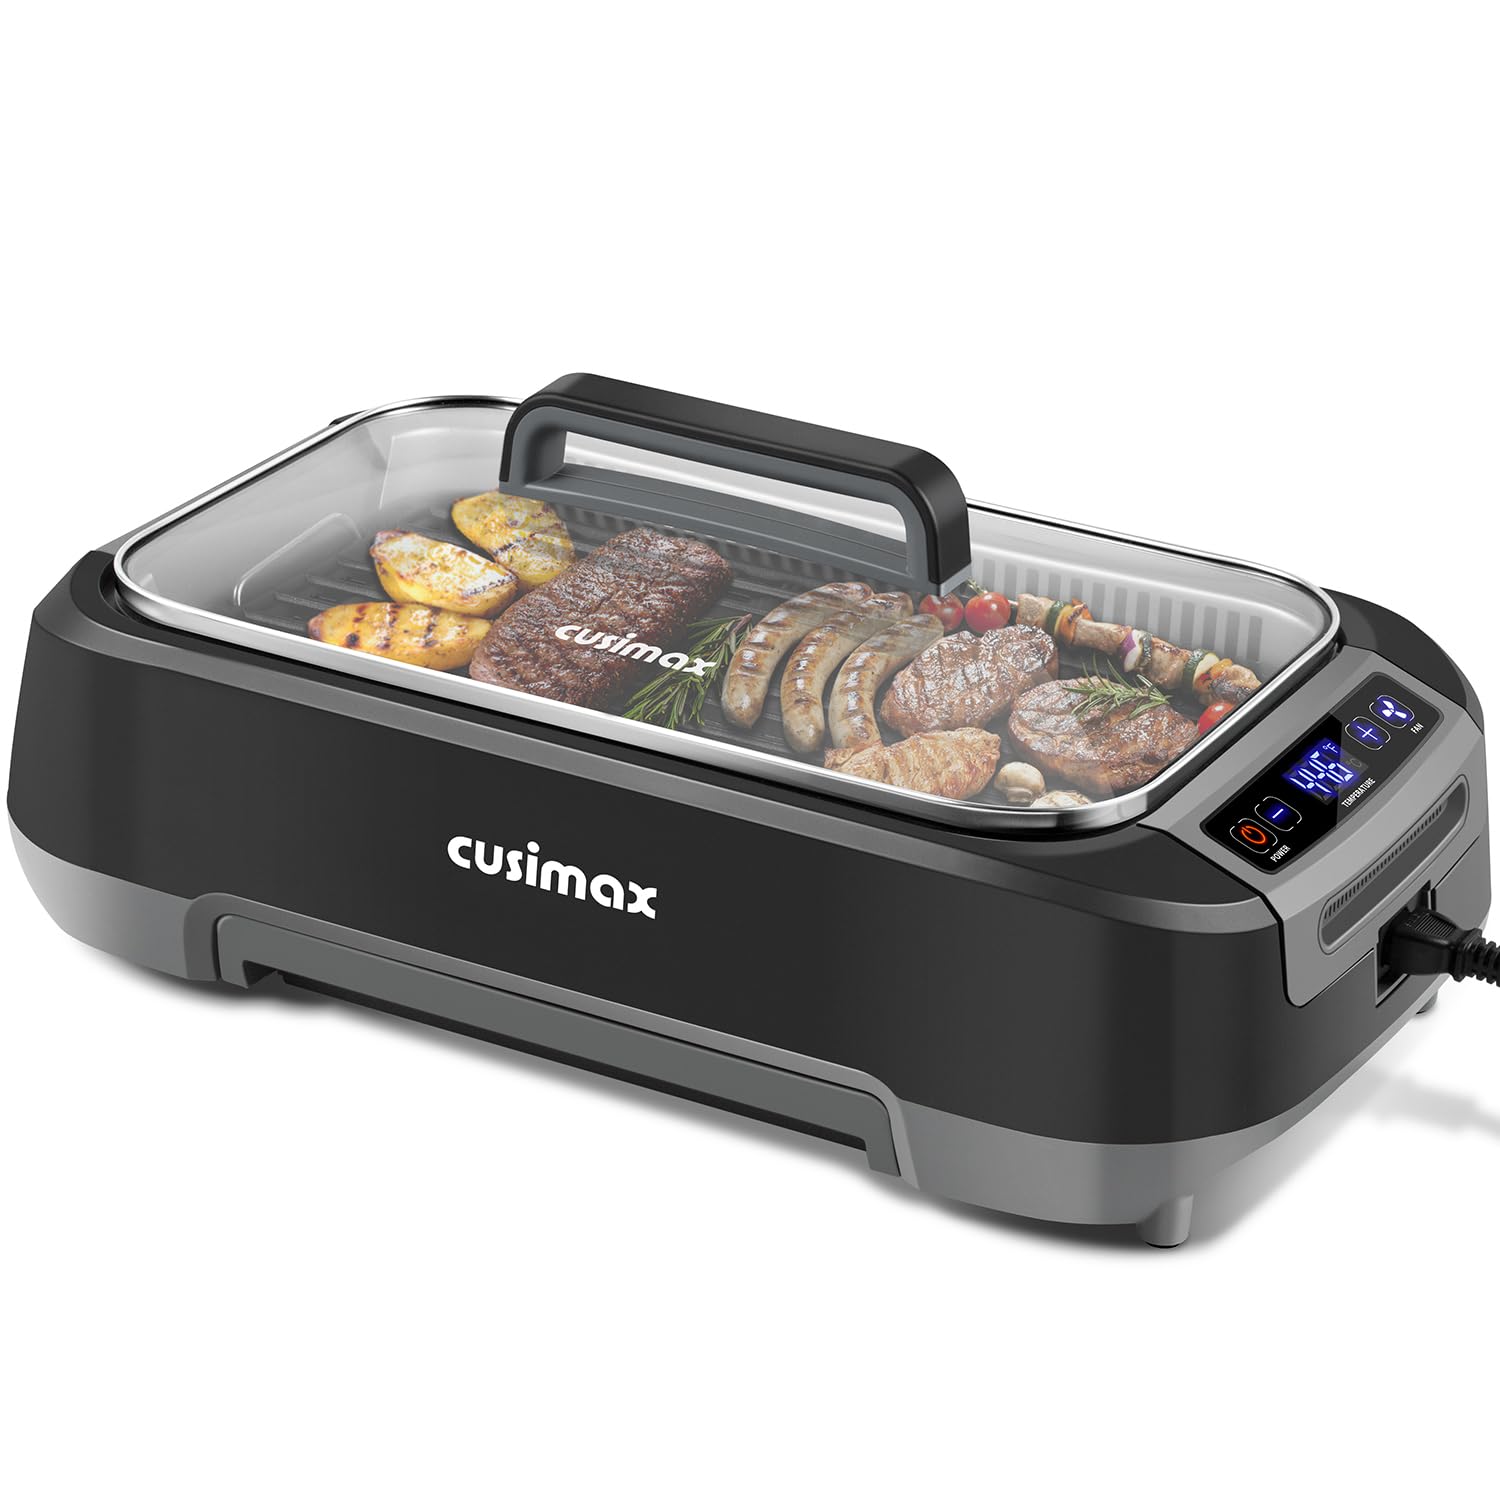 Cusimax 1500W Smokeless Indoor Grill with LED Smart Display & Non-stick Removable Grill Plate,Tempered Glass Lid,Turbo Smoke Extractor,212℉ to 446℉